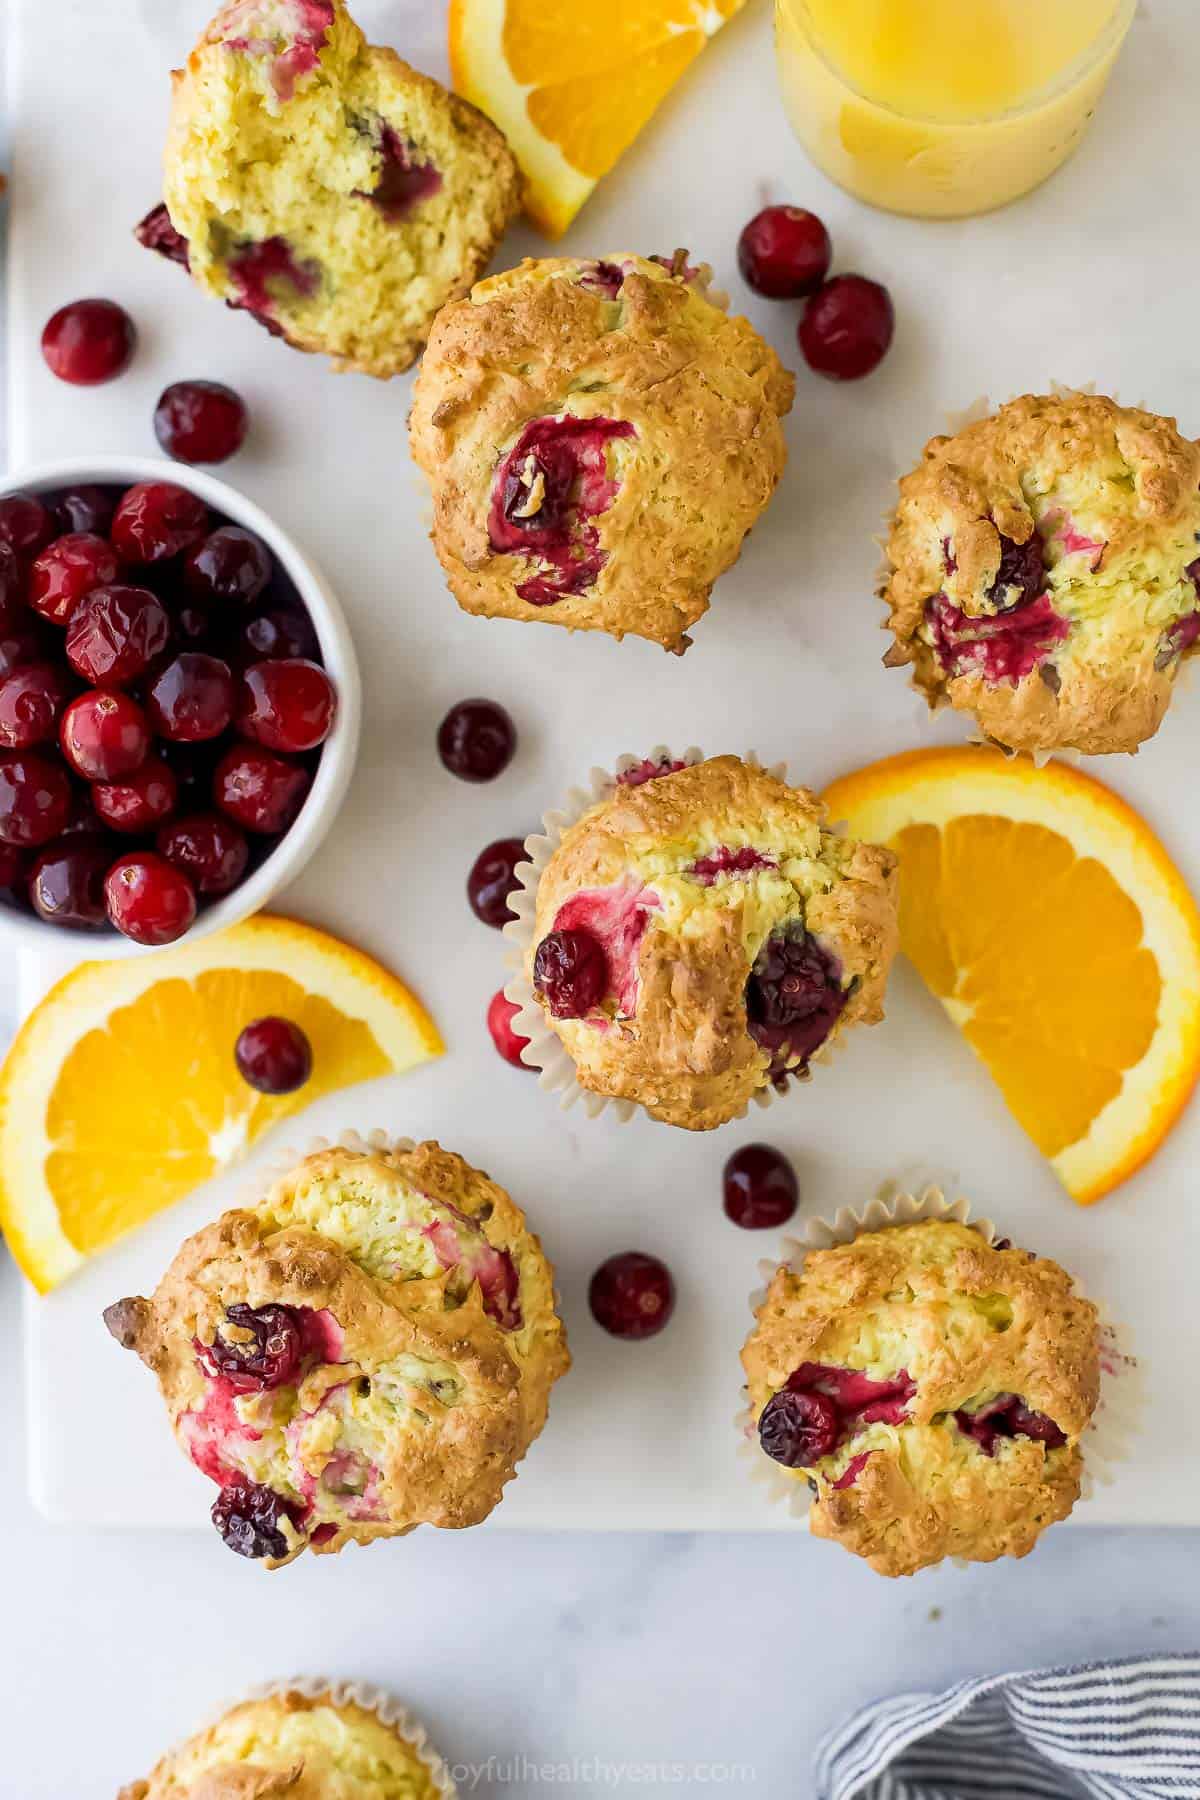 Five cranberry orange muffins on a sheet of parchment paper with orange slices and a bowl of fresh cranberries